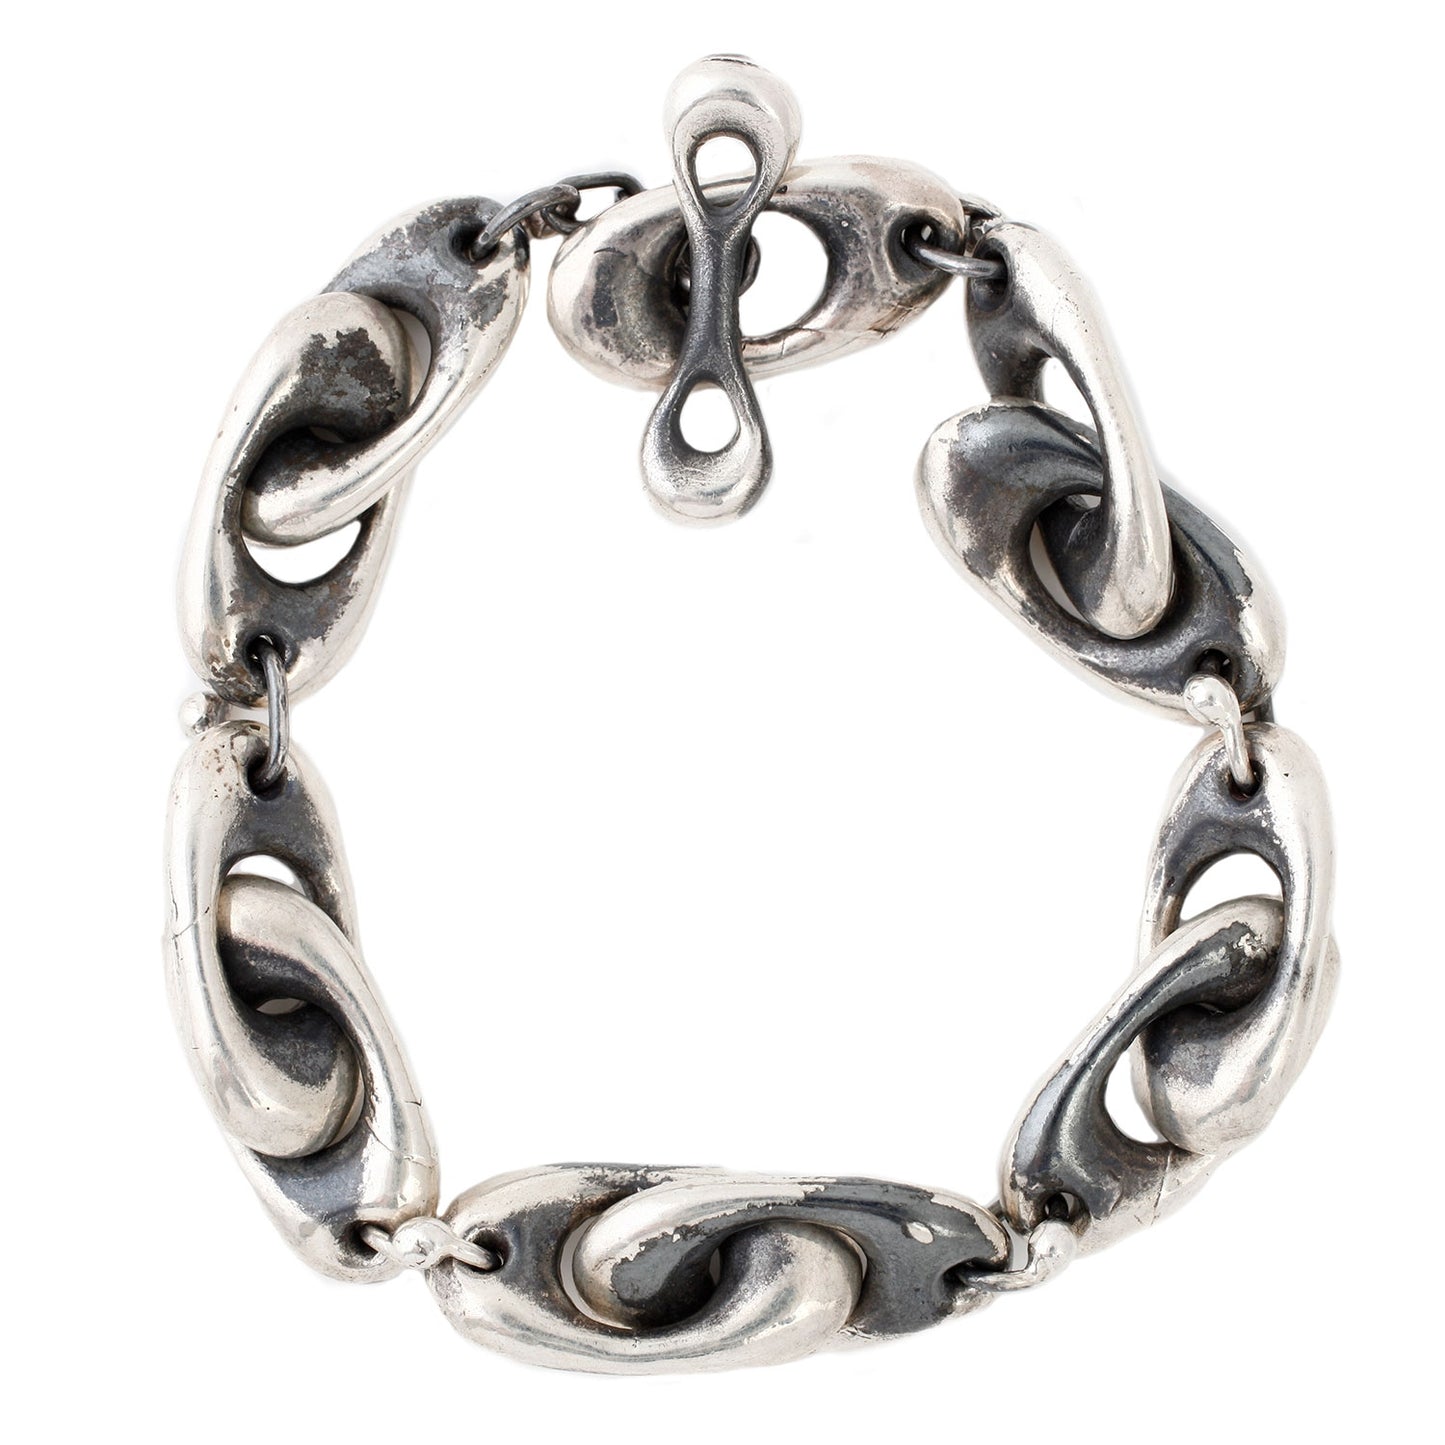 TenThousandThings Oxidized and Polished Sterling Silver Puffy Link Bracelet